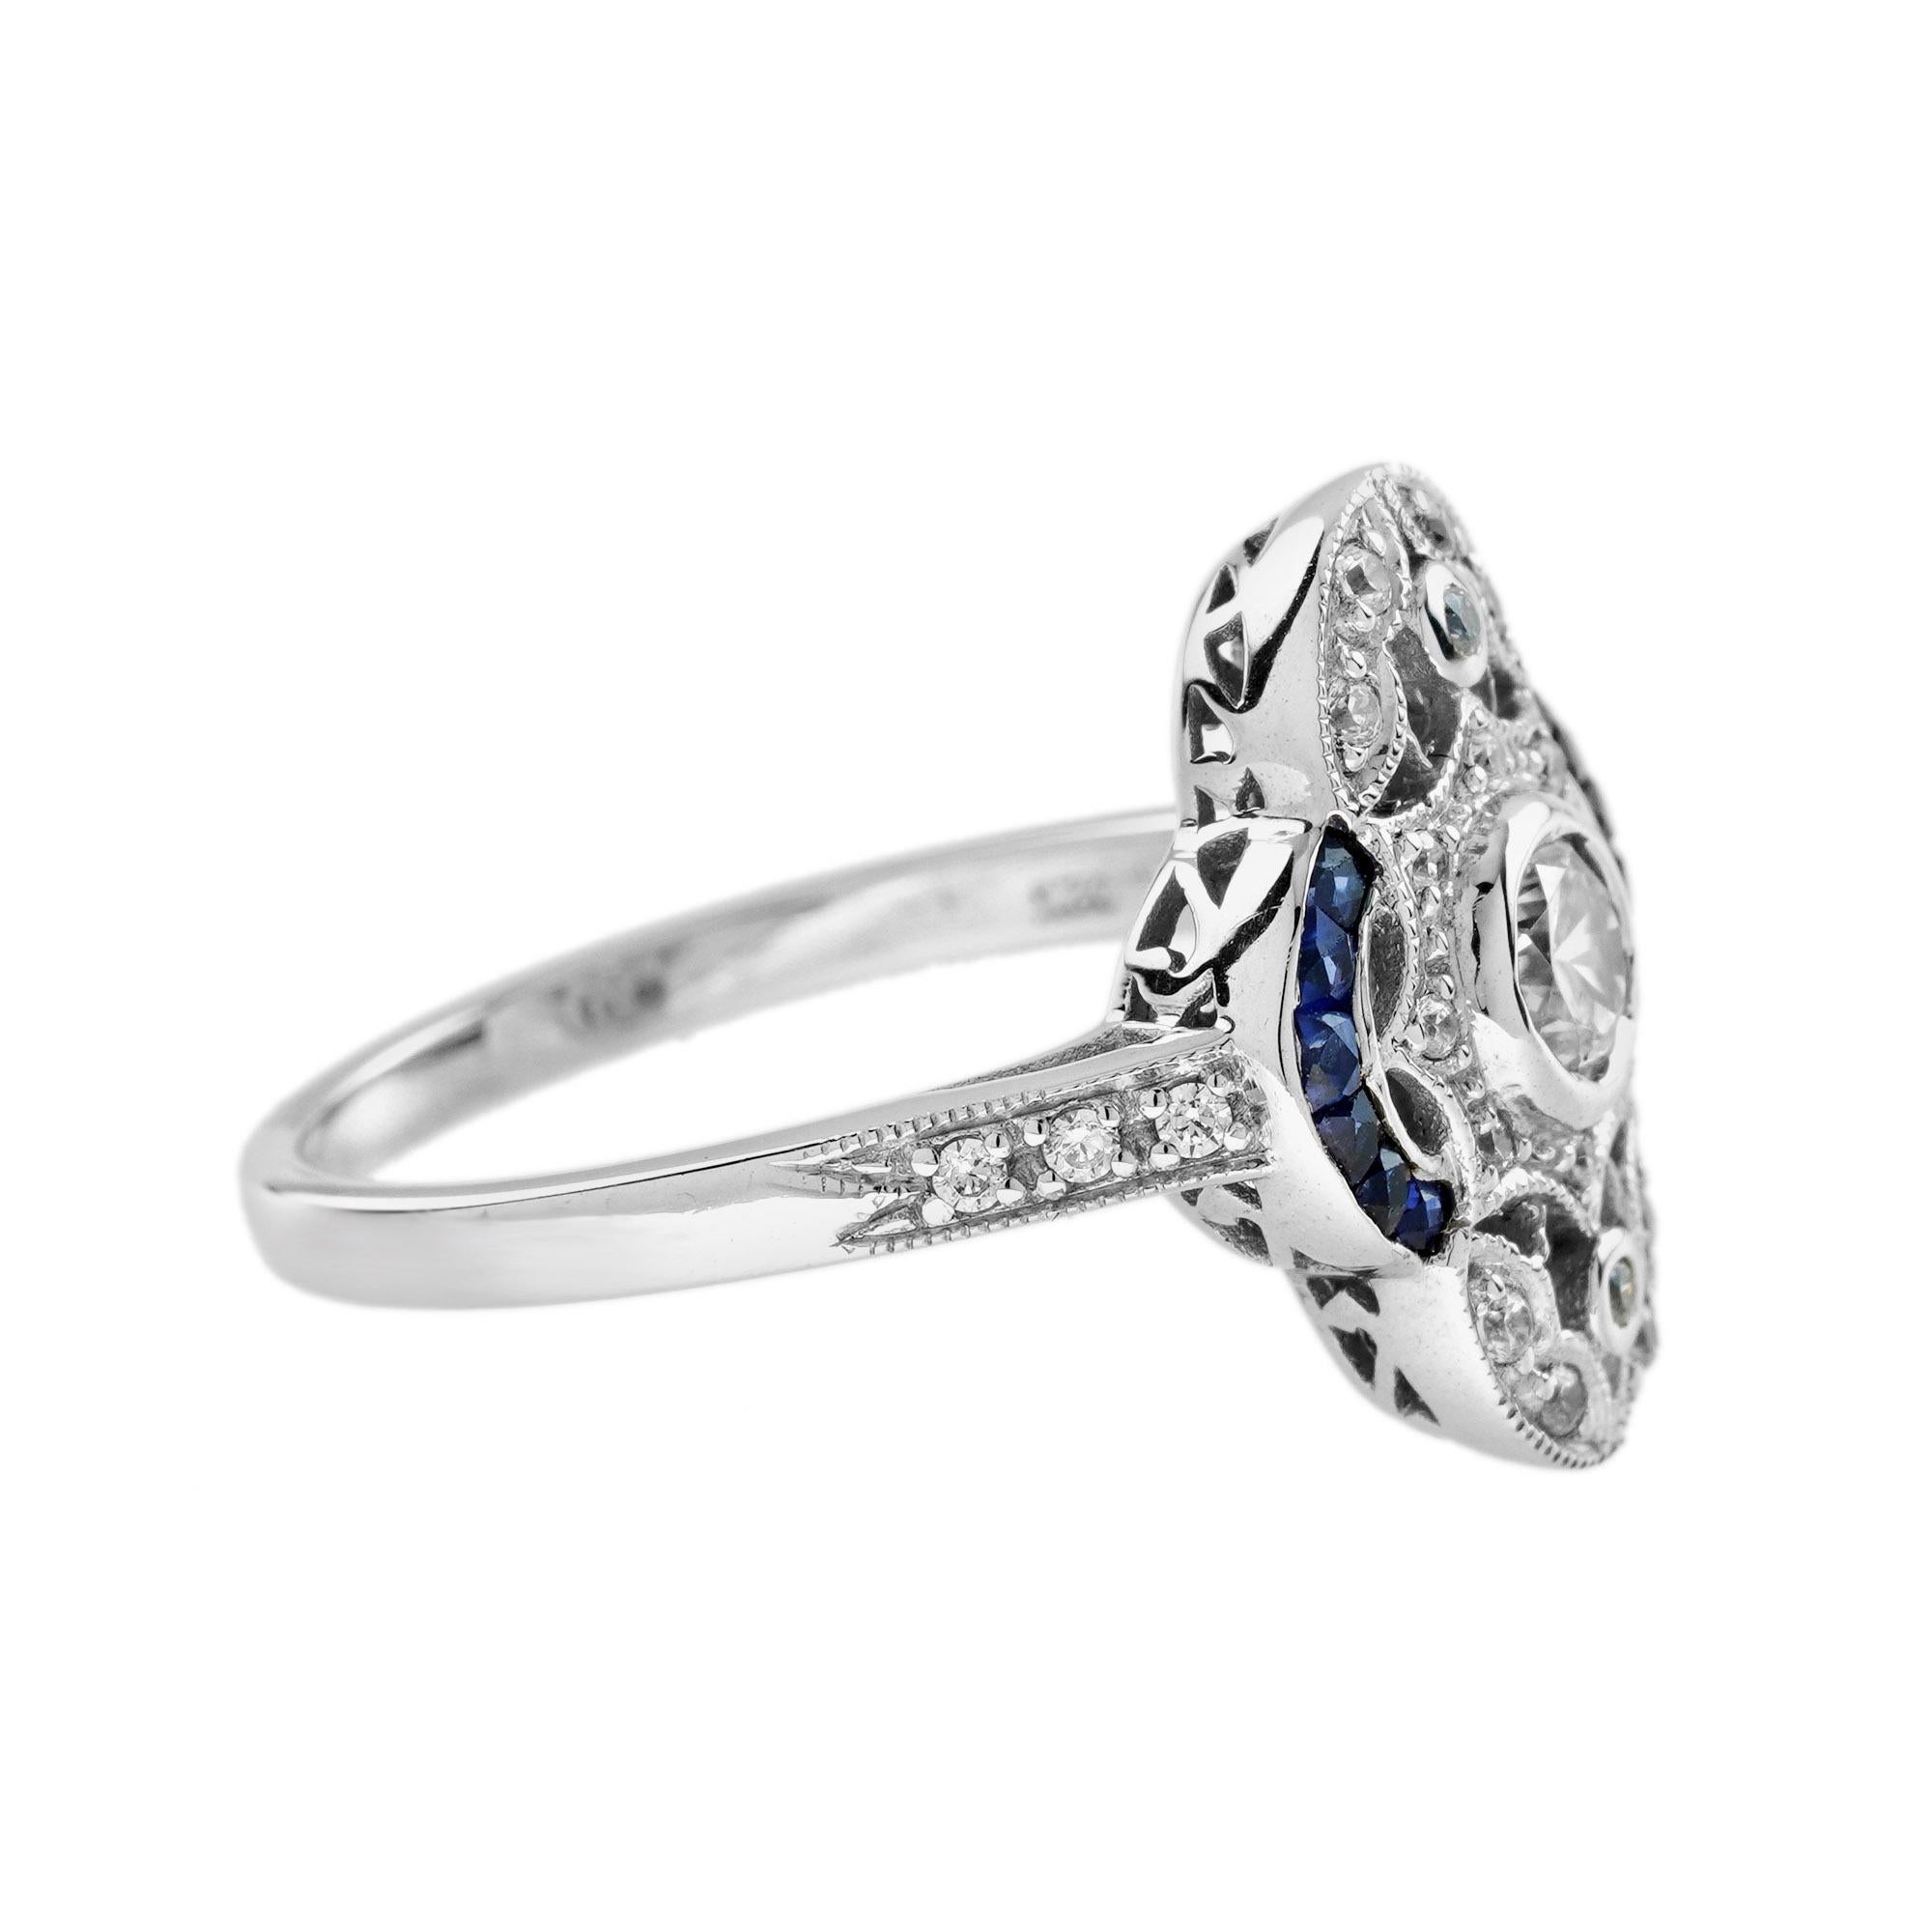 For Sale:  Diamond and Blue Sapphire Art Deco Style Cluster Ring in 18K White Gold 4